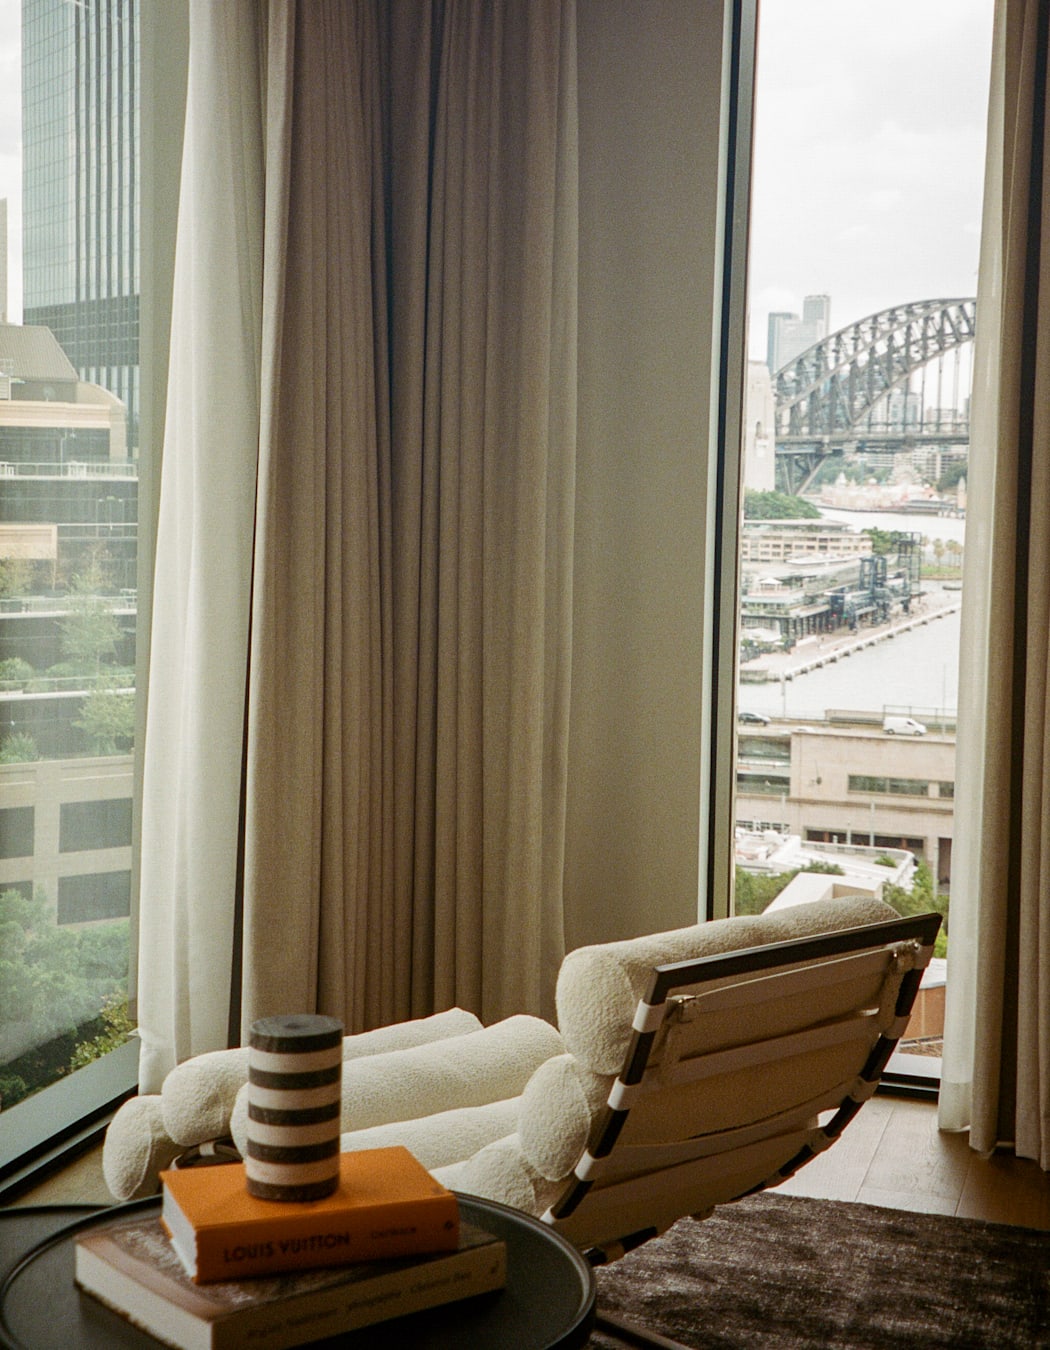 A curved chair with a view of Sydney